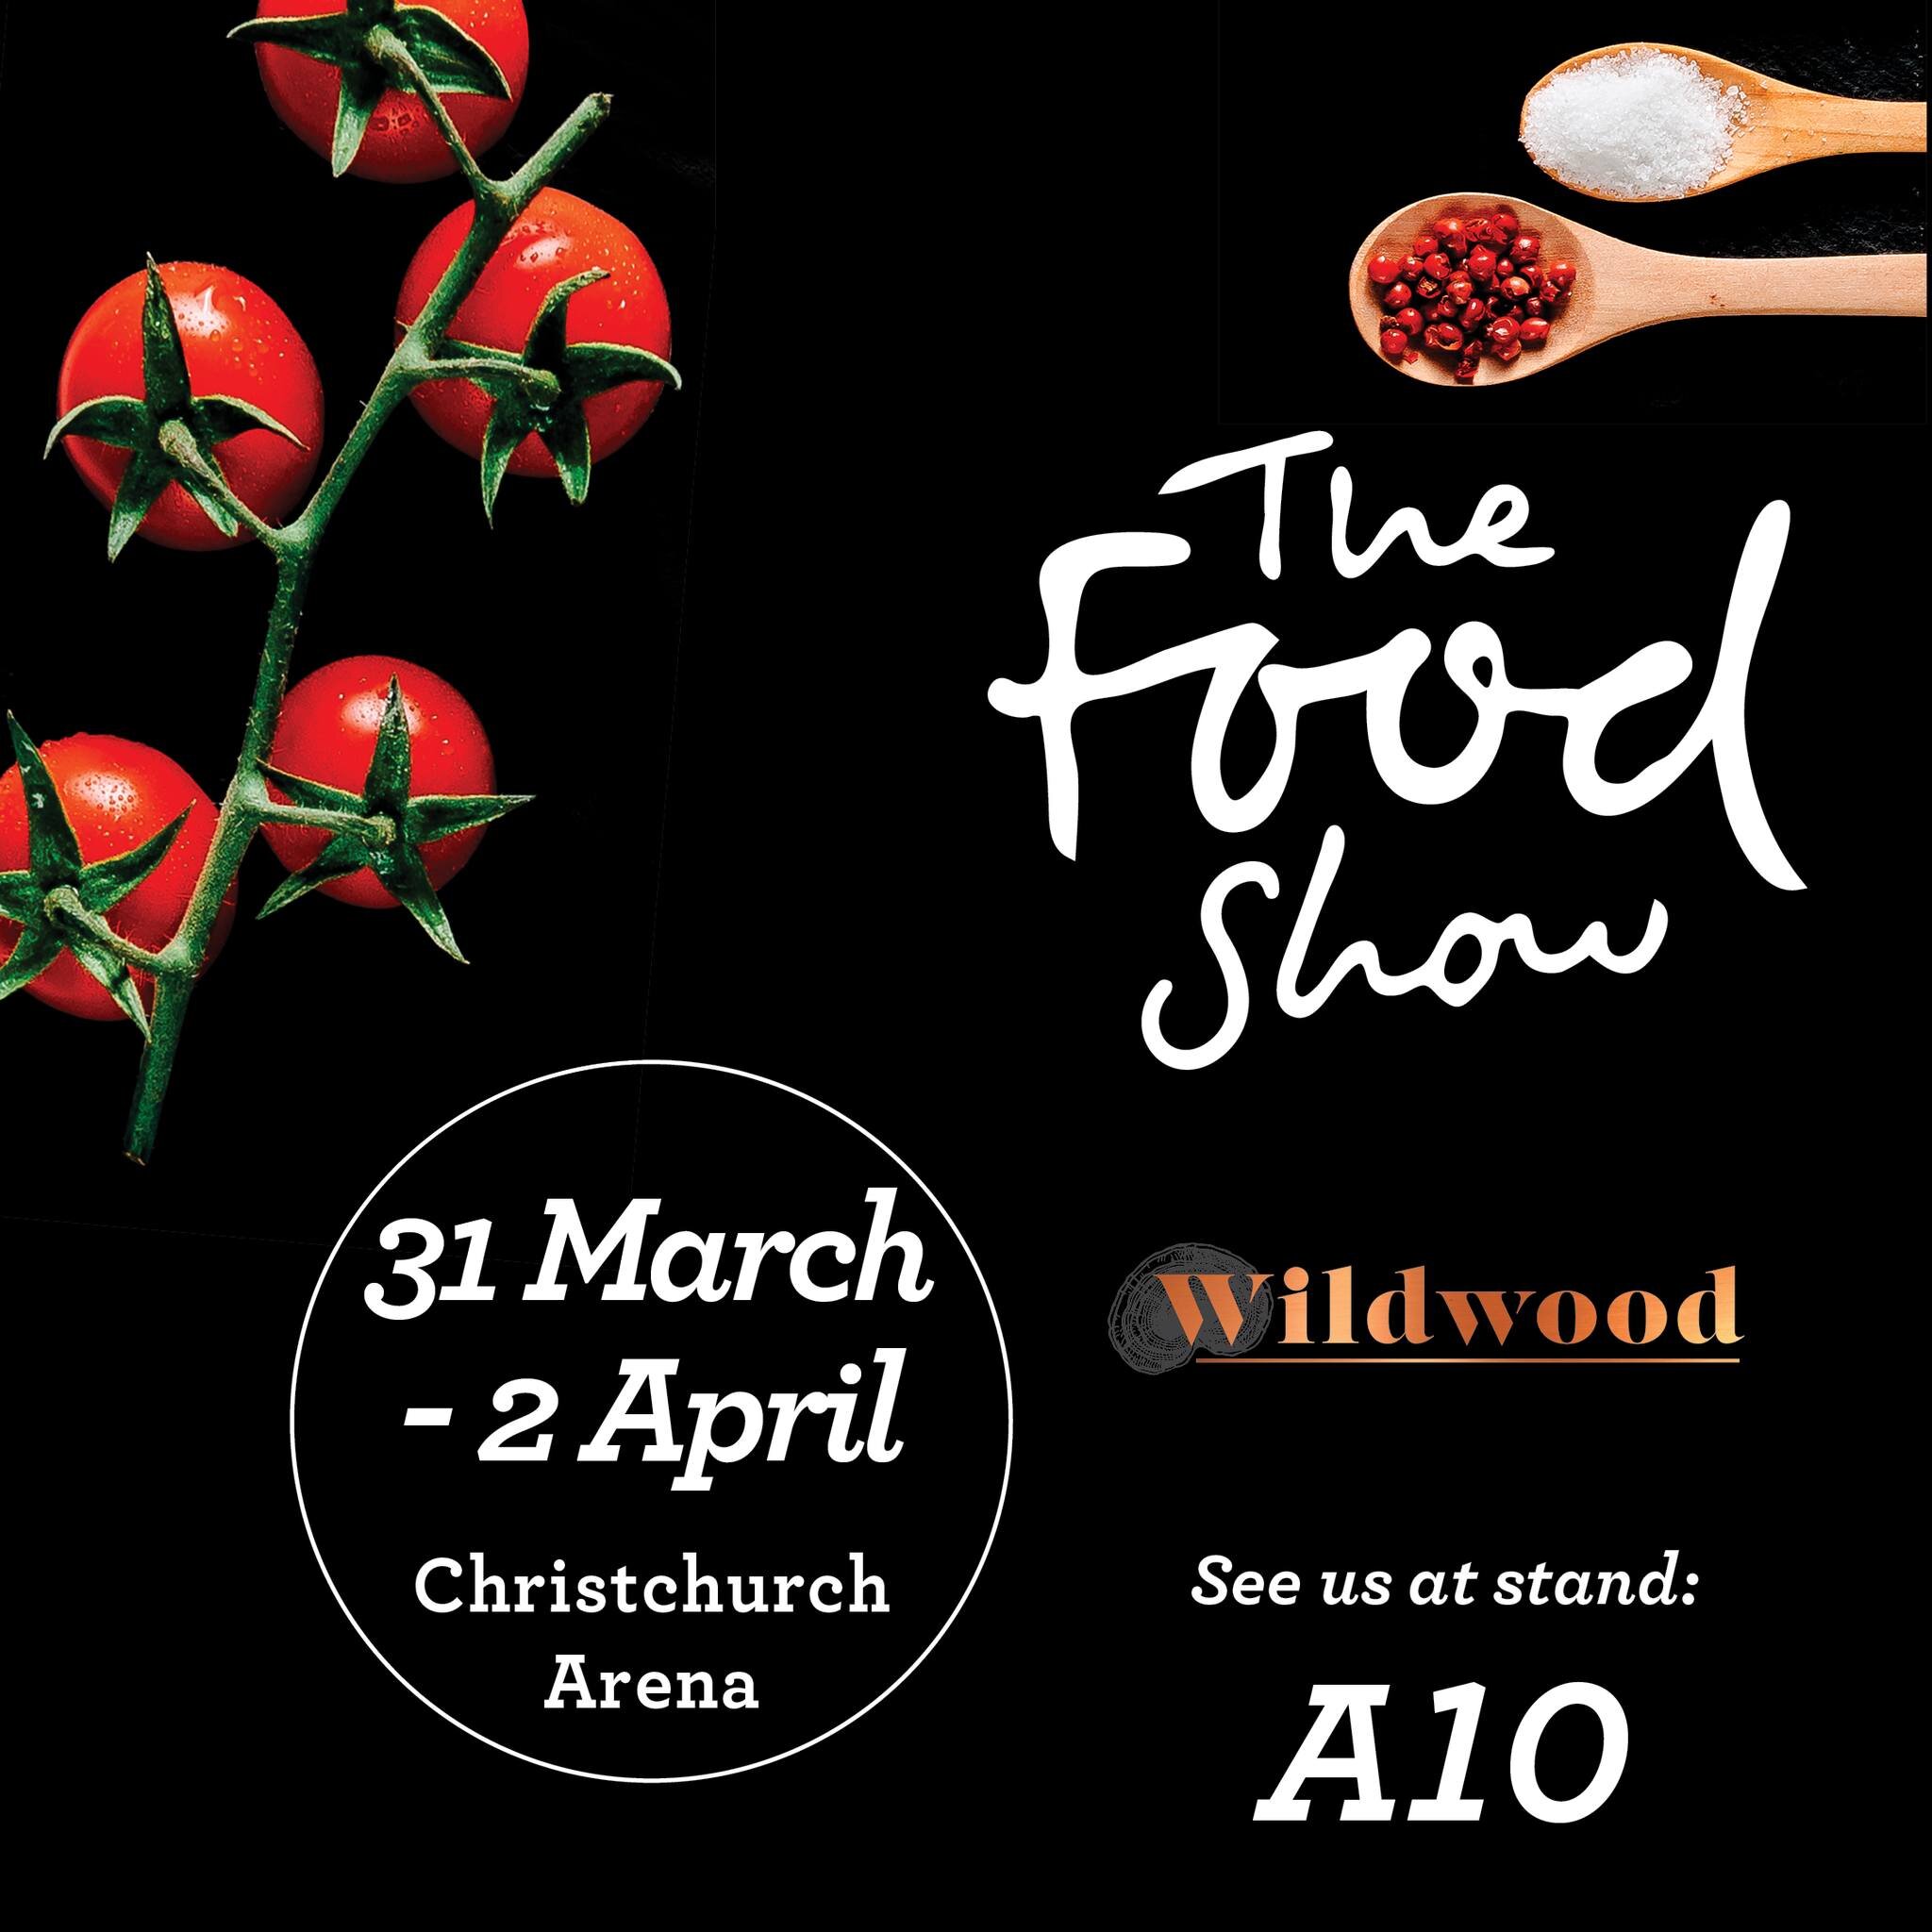 Look out for Wildwood @foodshownz  in Christchurch this weekend. Come and say hi. We can share a brew ☕️

Will you be there? 

 #Reishi #magicmoment #Lionsmane #dailyritual #cacaobliss #cordyceps #mushroomcacao #mushroomdelicious #functionalmushrooms